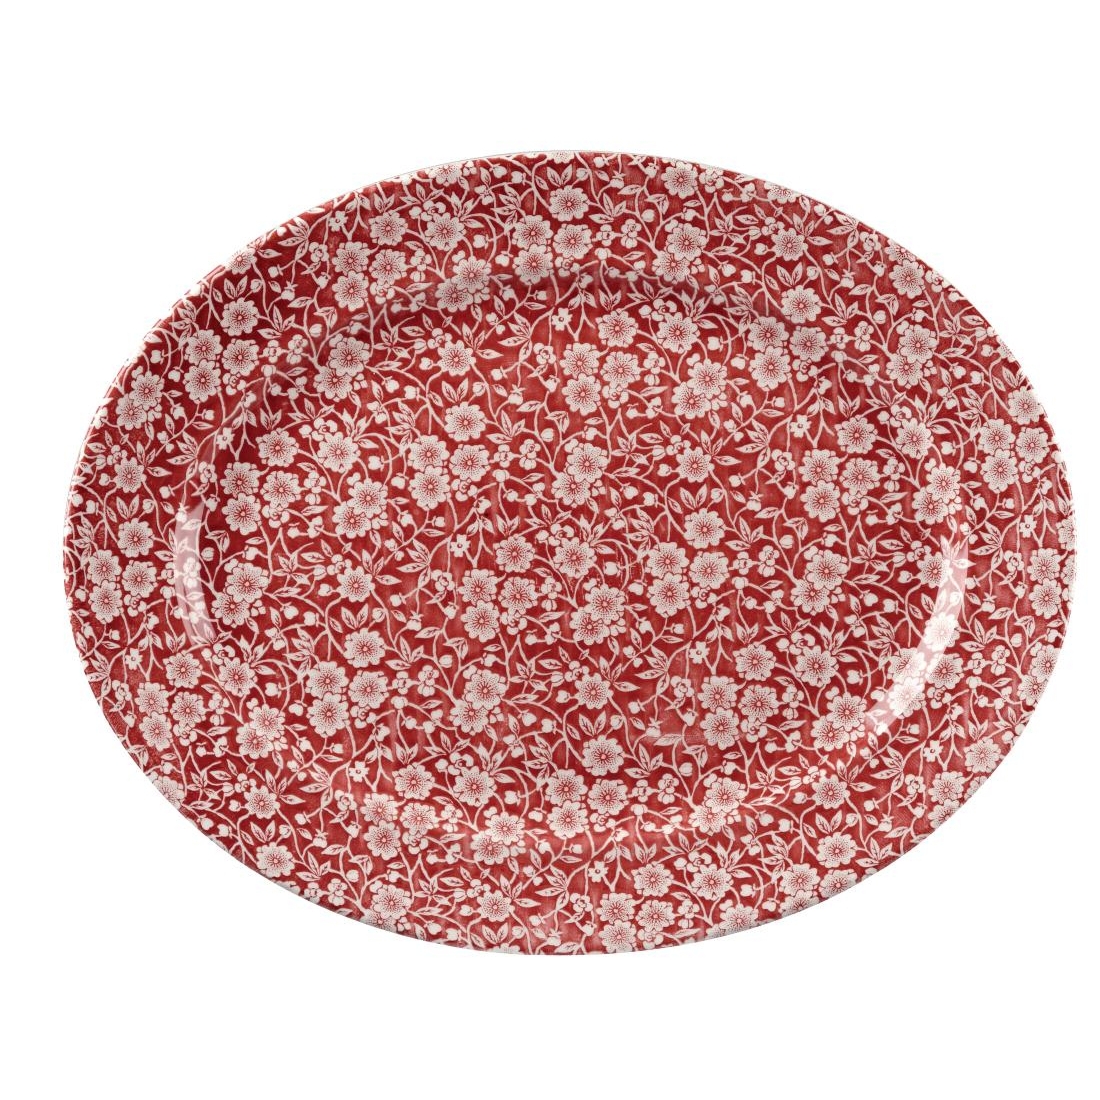 Churchill Vintage Prints Oval Dishes Cranberry Print 365mm